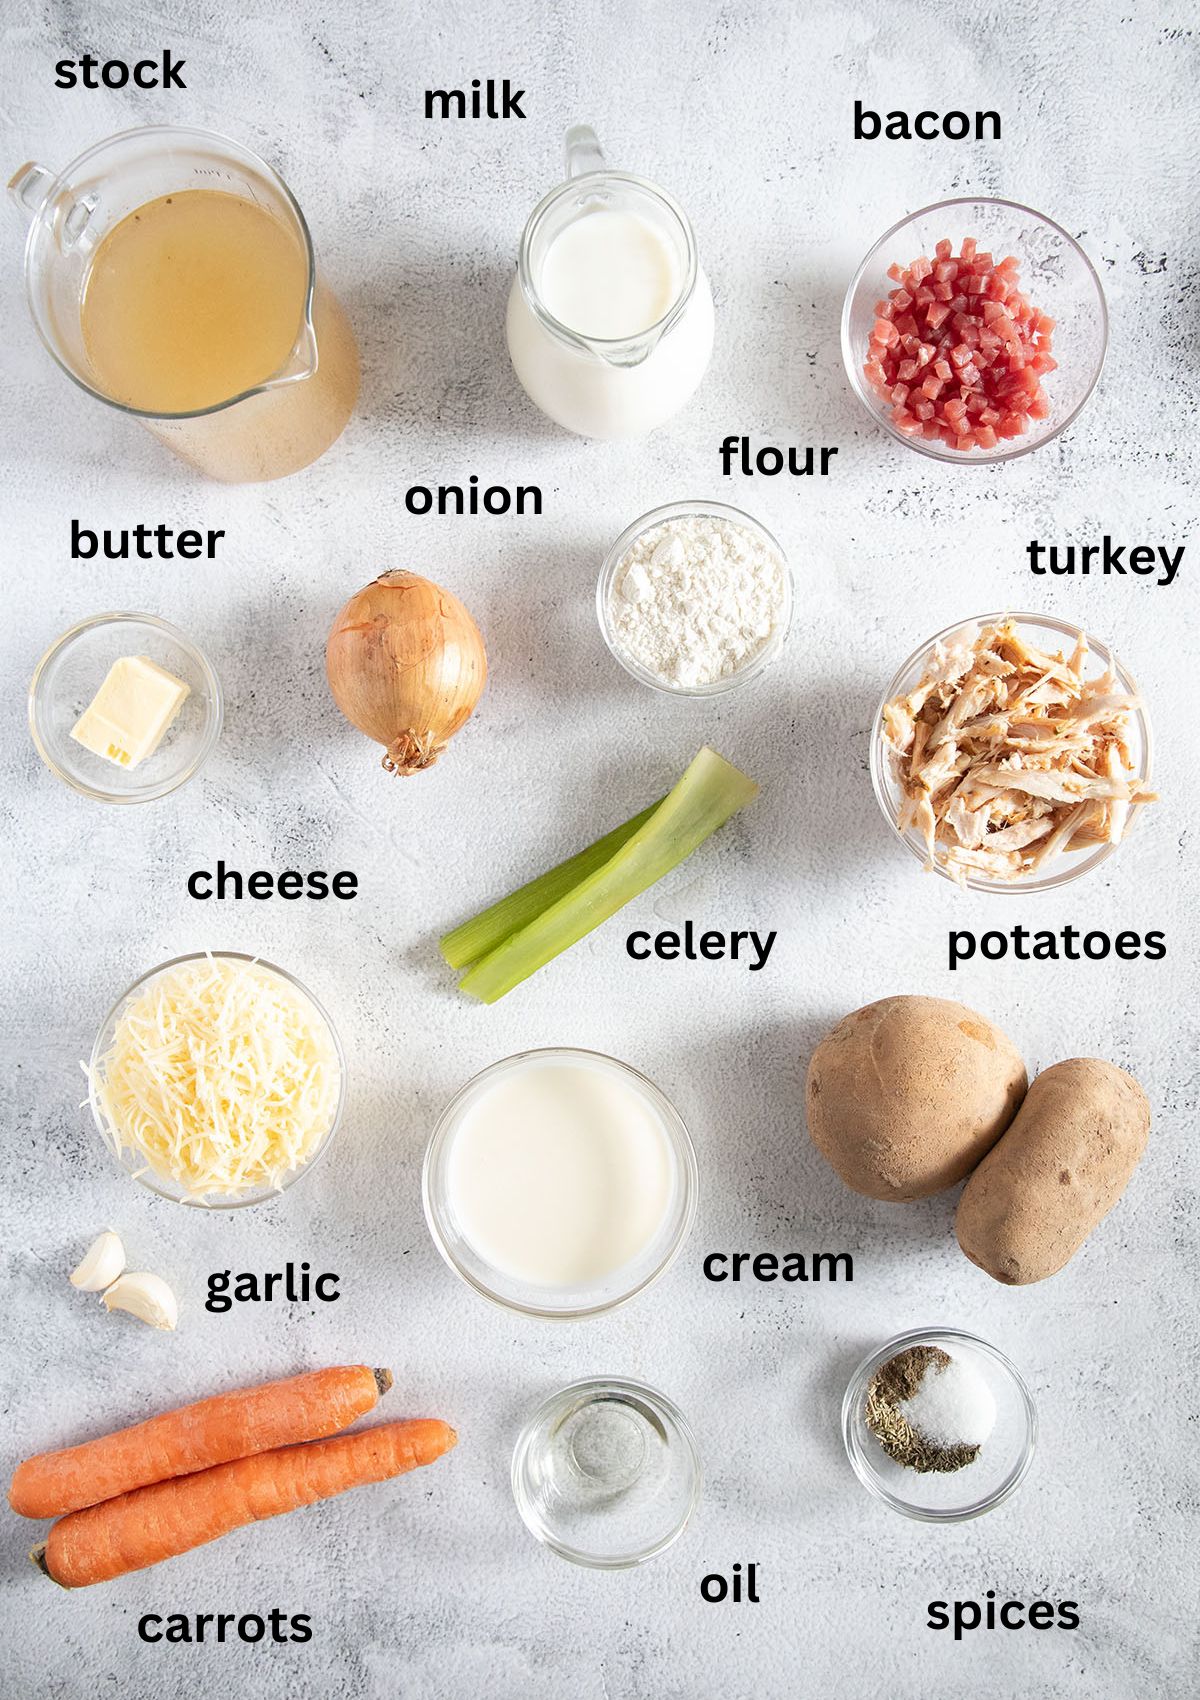 labeled ingredients for making potato soup with turkey leftovers and cheese.